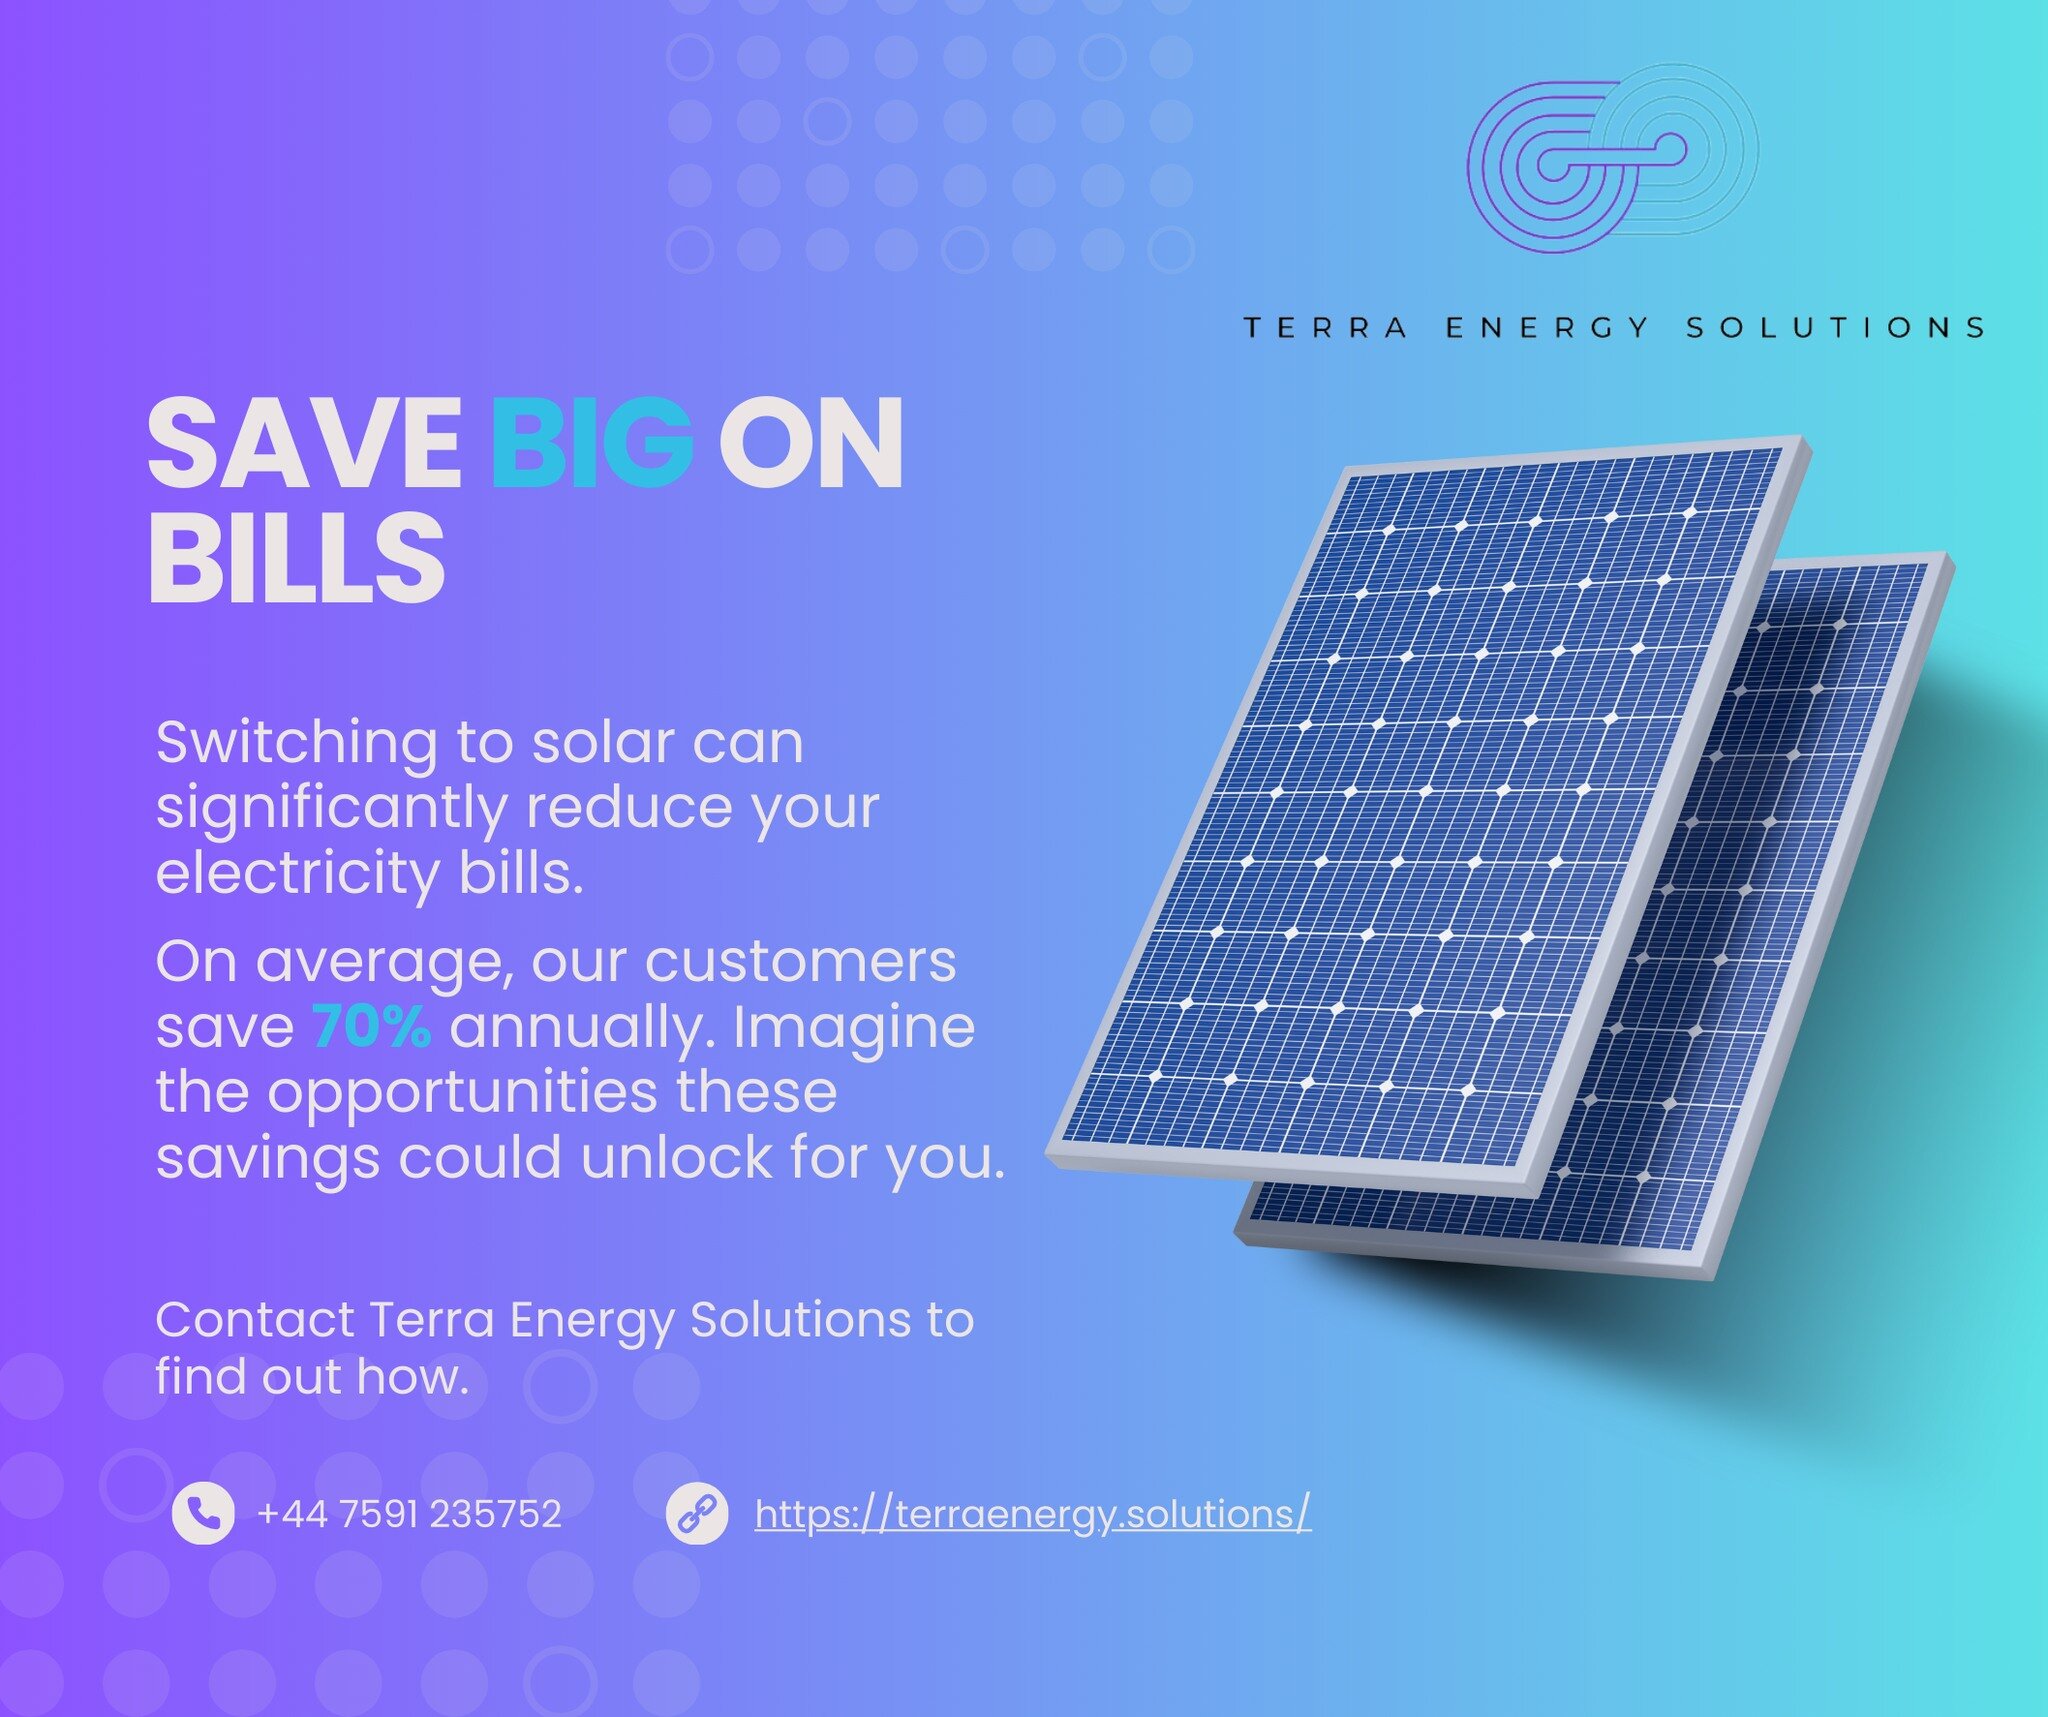 💡✨ Dreaming of lower electricity bills? Our customers are living that dream, saving up to 70% annually by switching to solar! Imagine the possibilities with those savings. Ready to make the switch? Contact us today to start your journey to significa